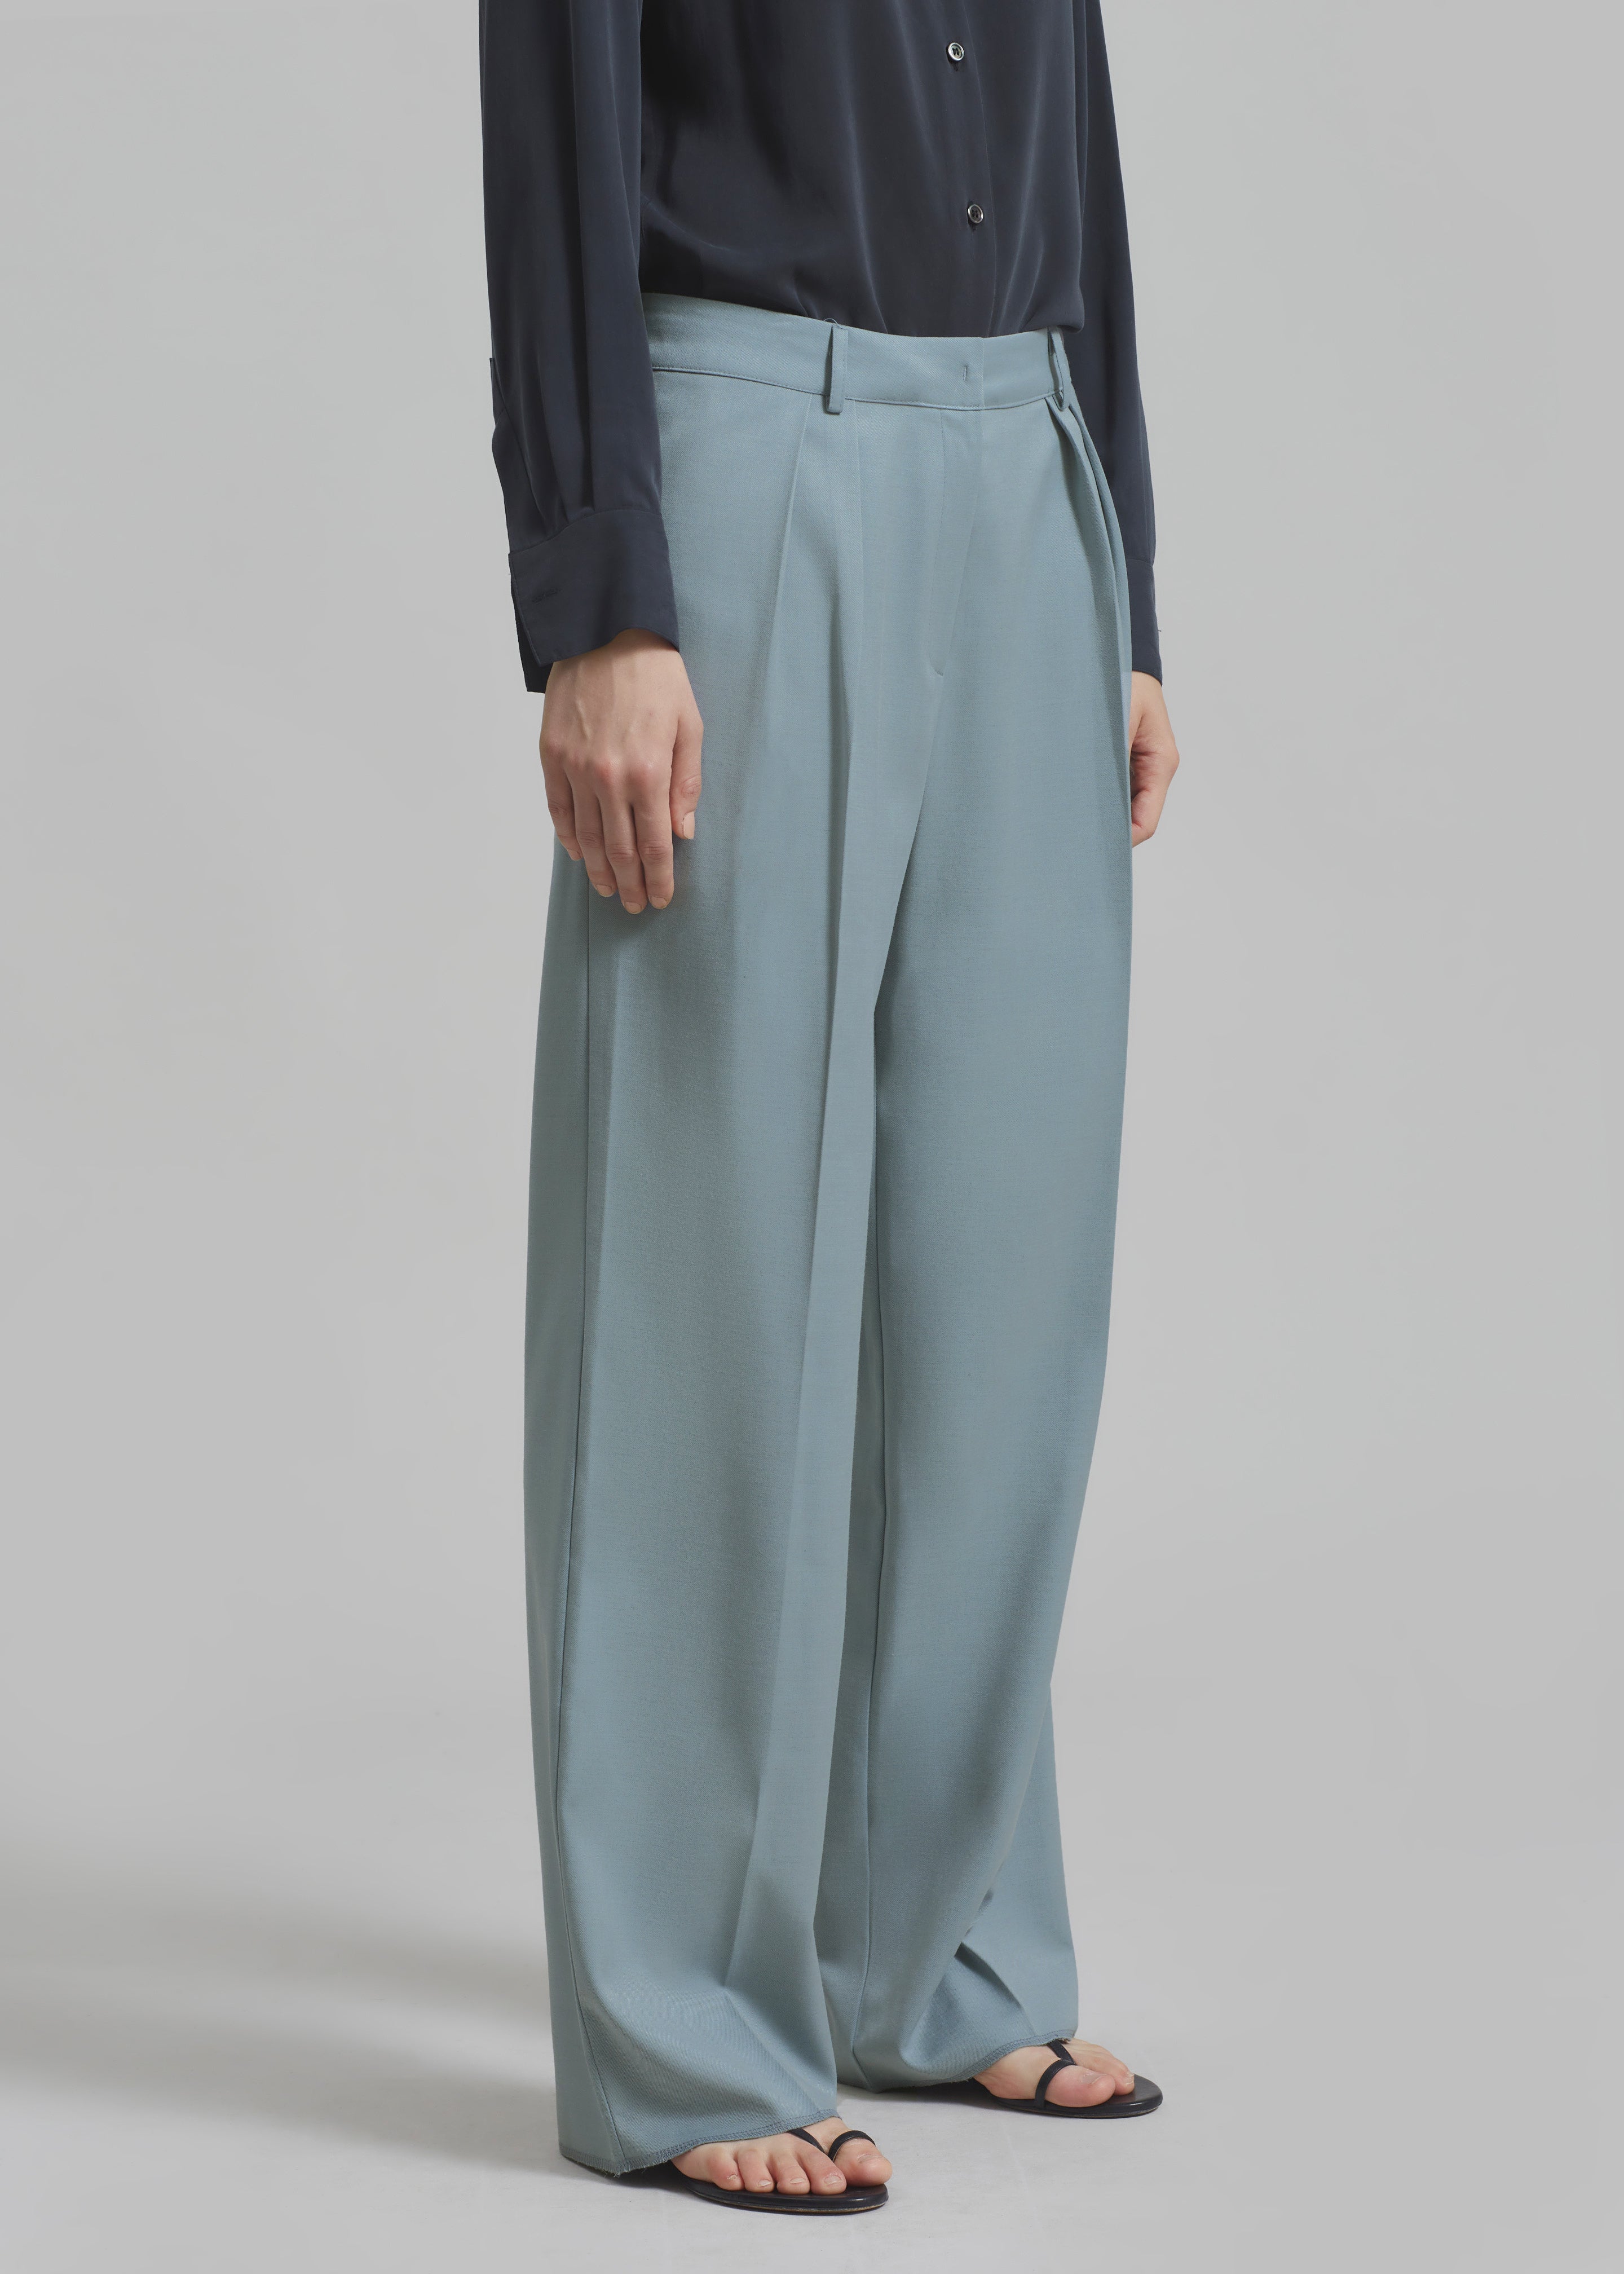 Spencer Pleated Pants - Dusty Blue - 13